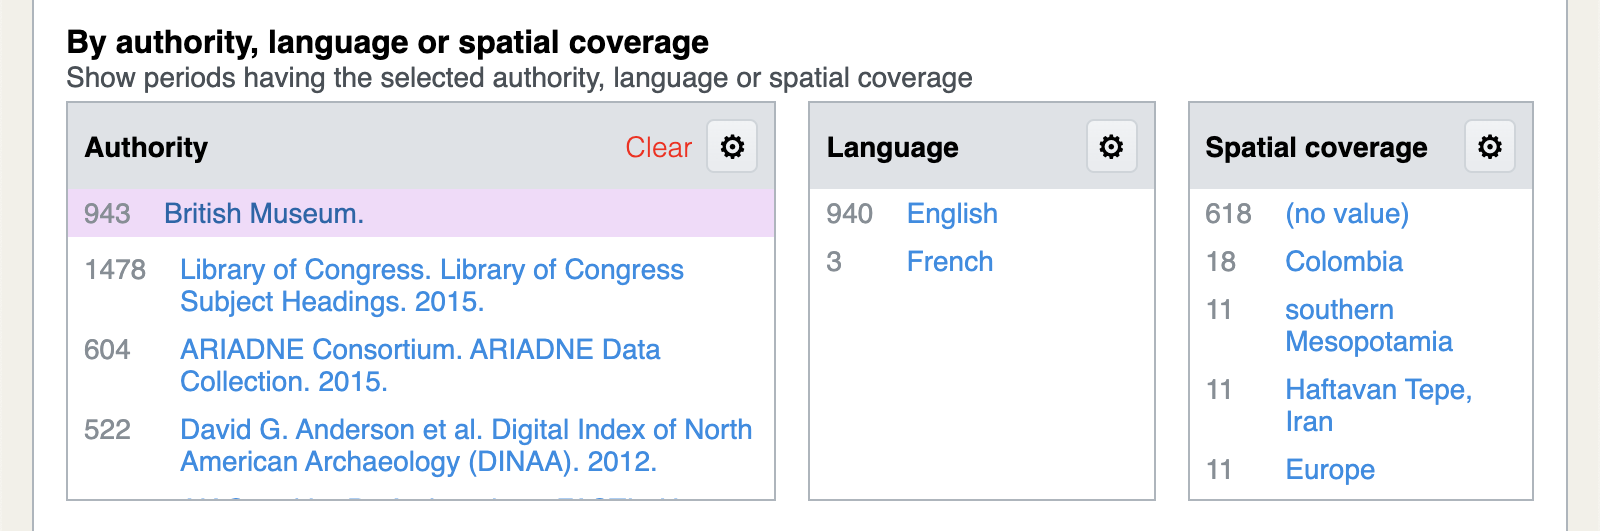 Some periods do not have a spatial coverage description